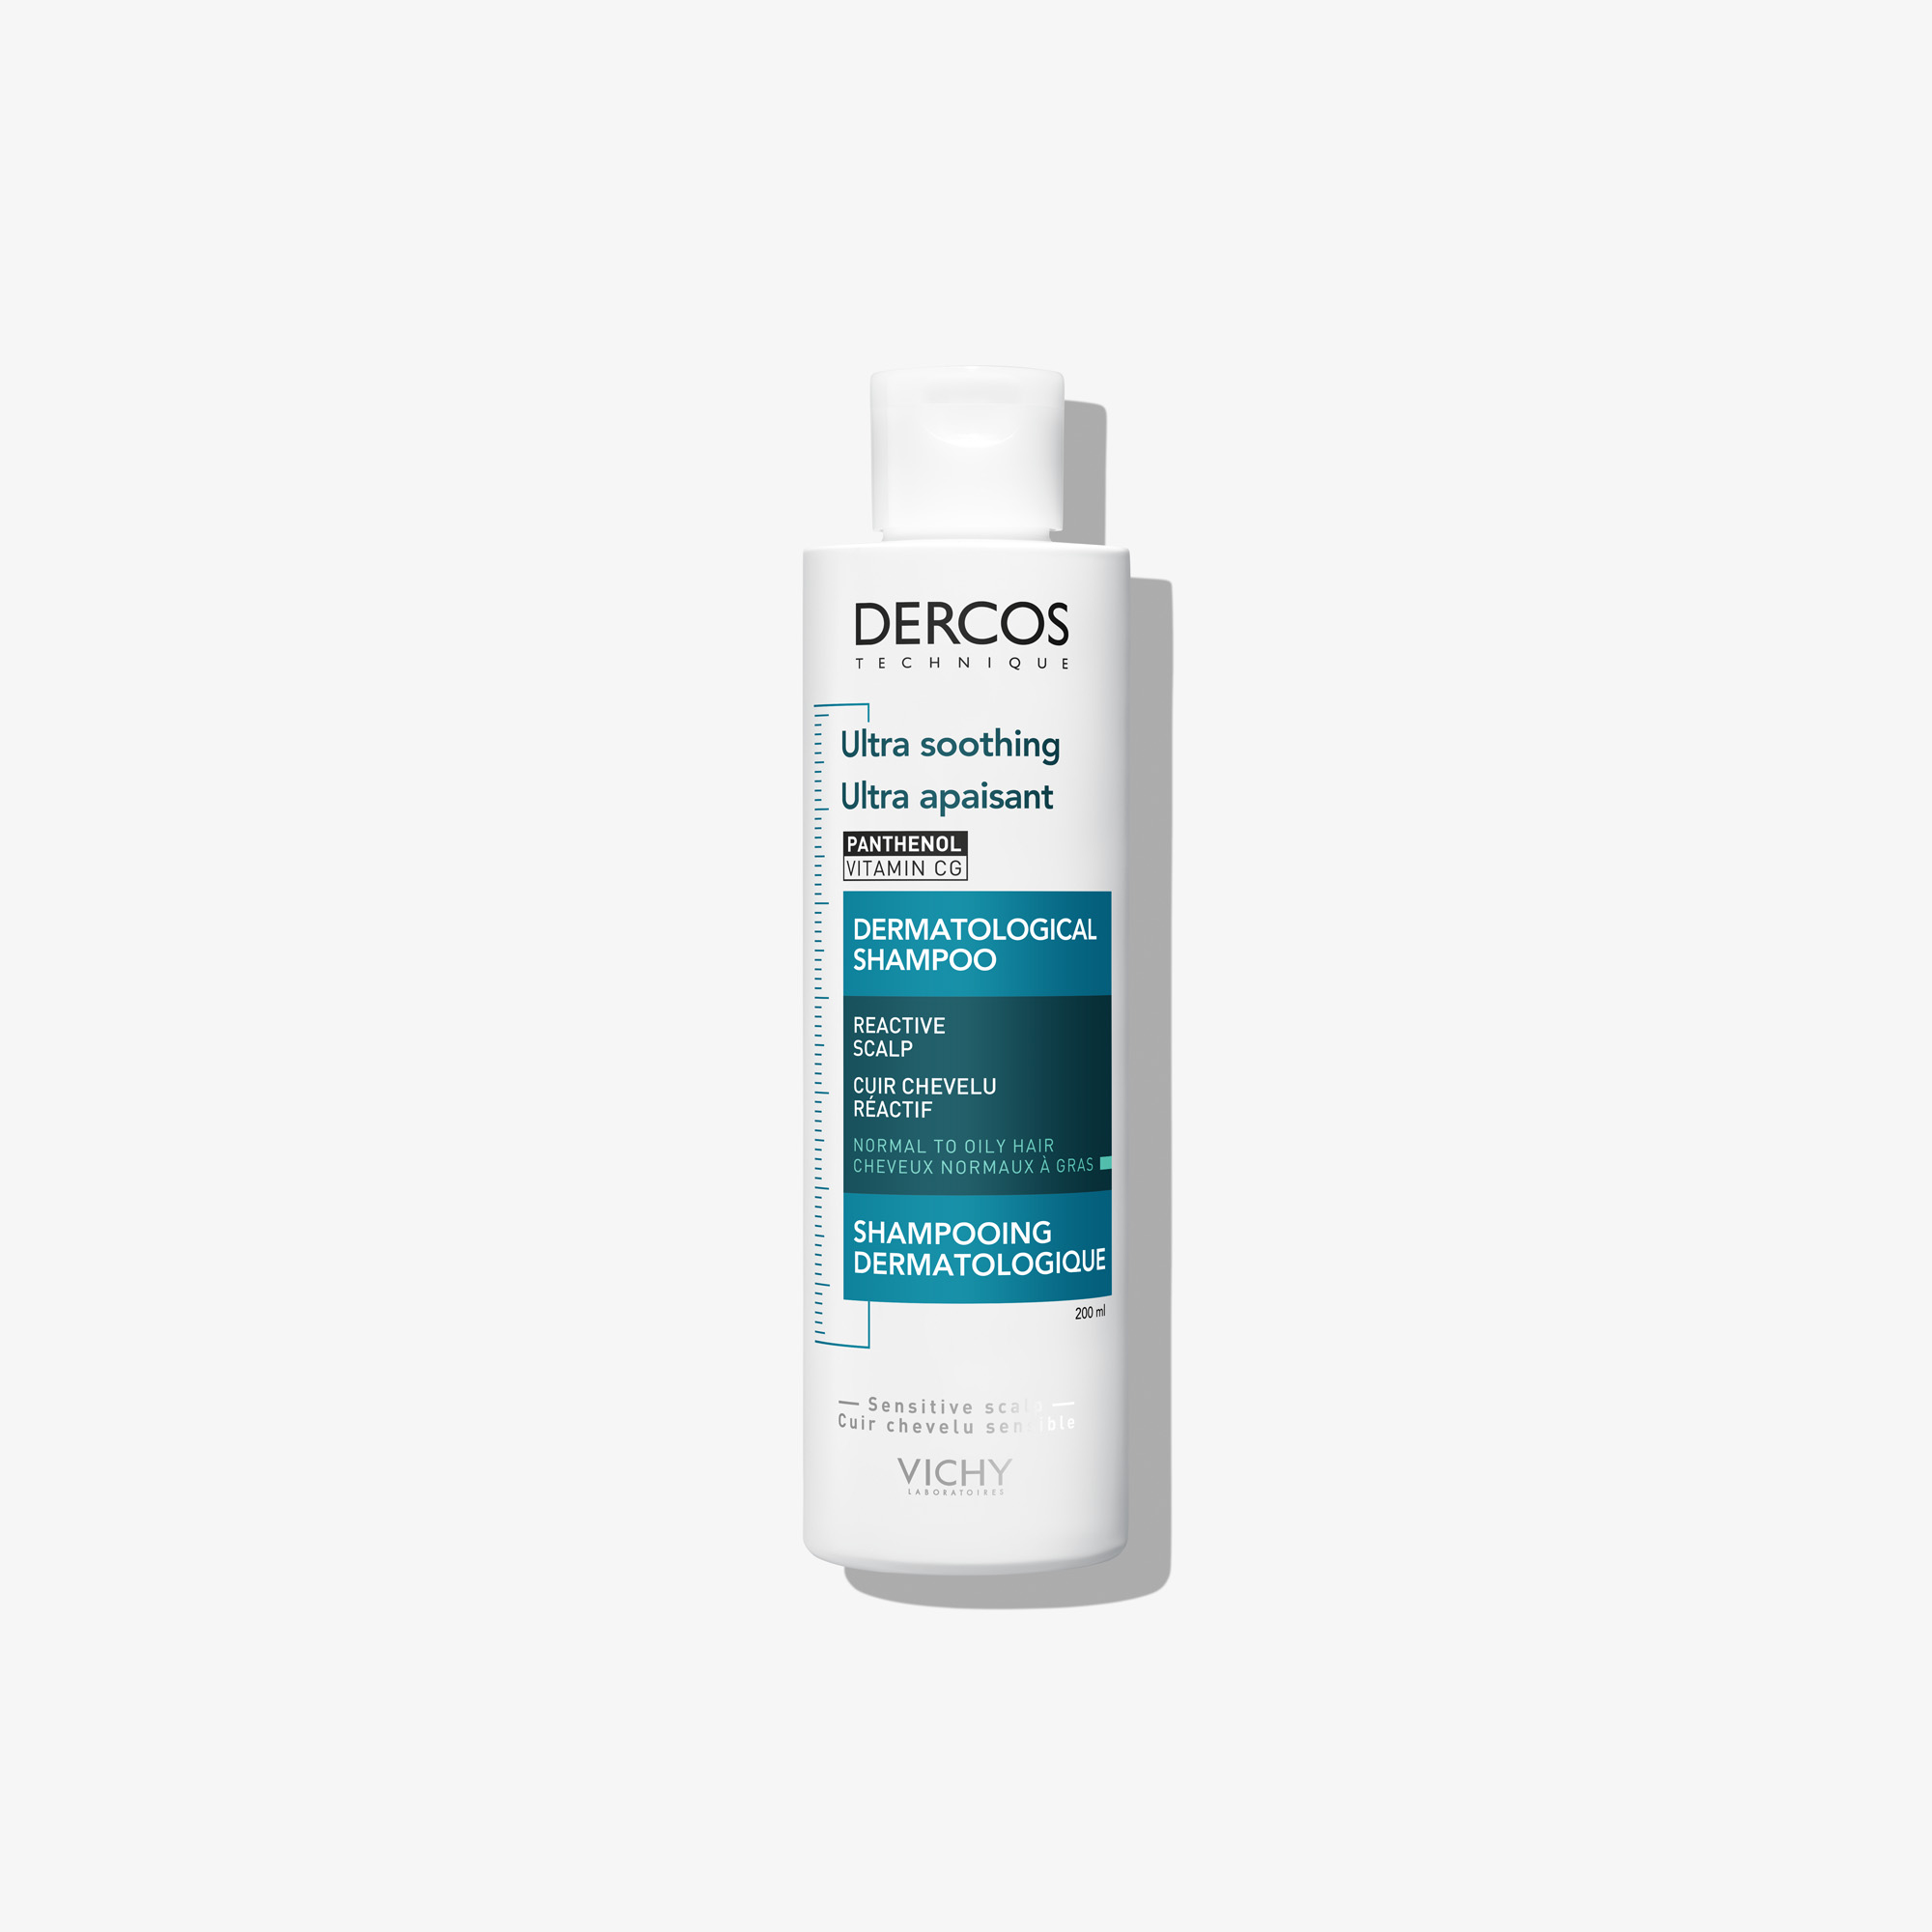 Shampoo for Reactive Scalp and Normal to Oily Hair-200ml